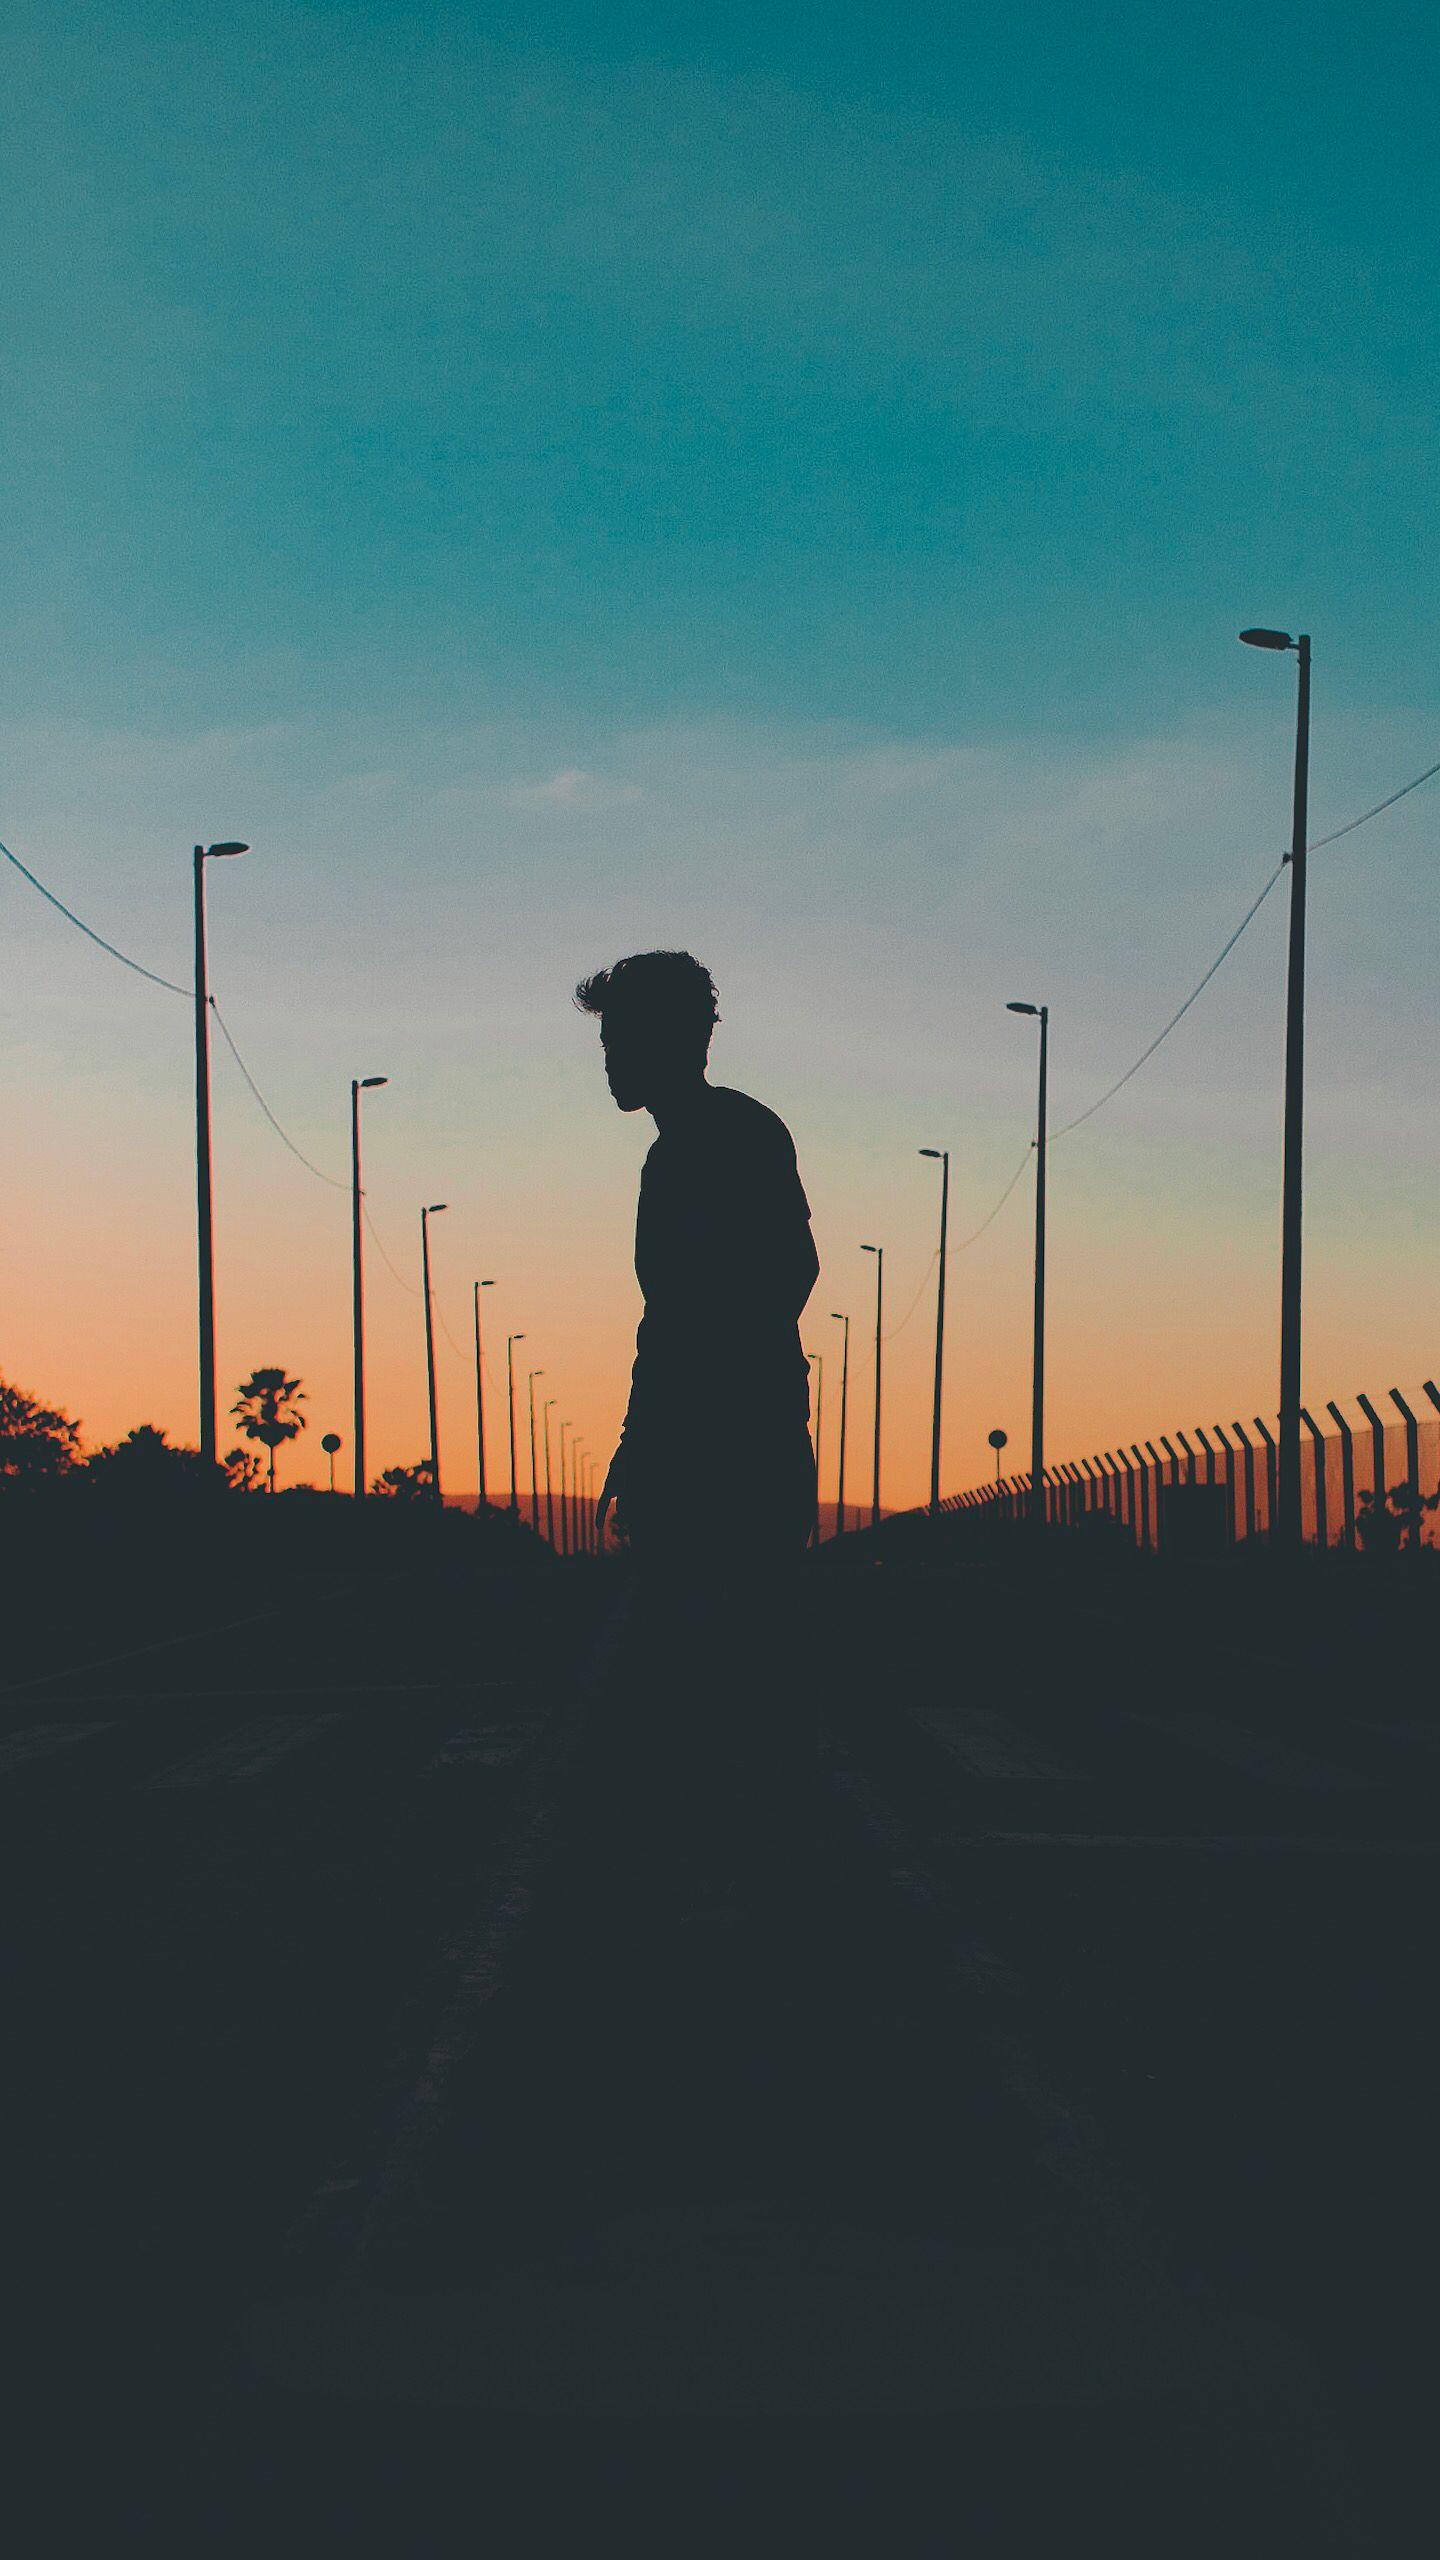 tumblr #photography #boy #sky #silhouette. Silhoutte photography